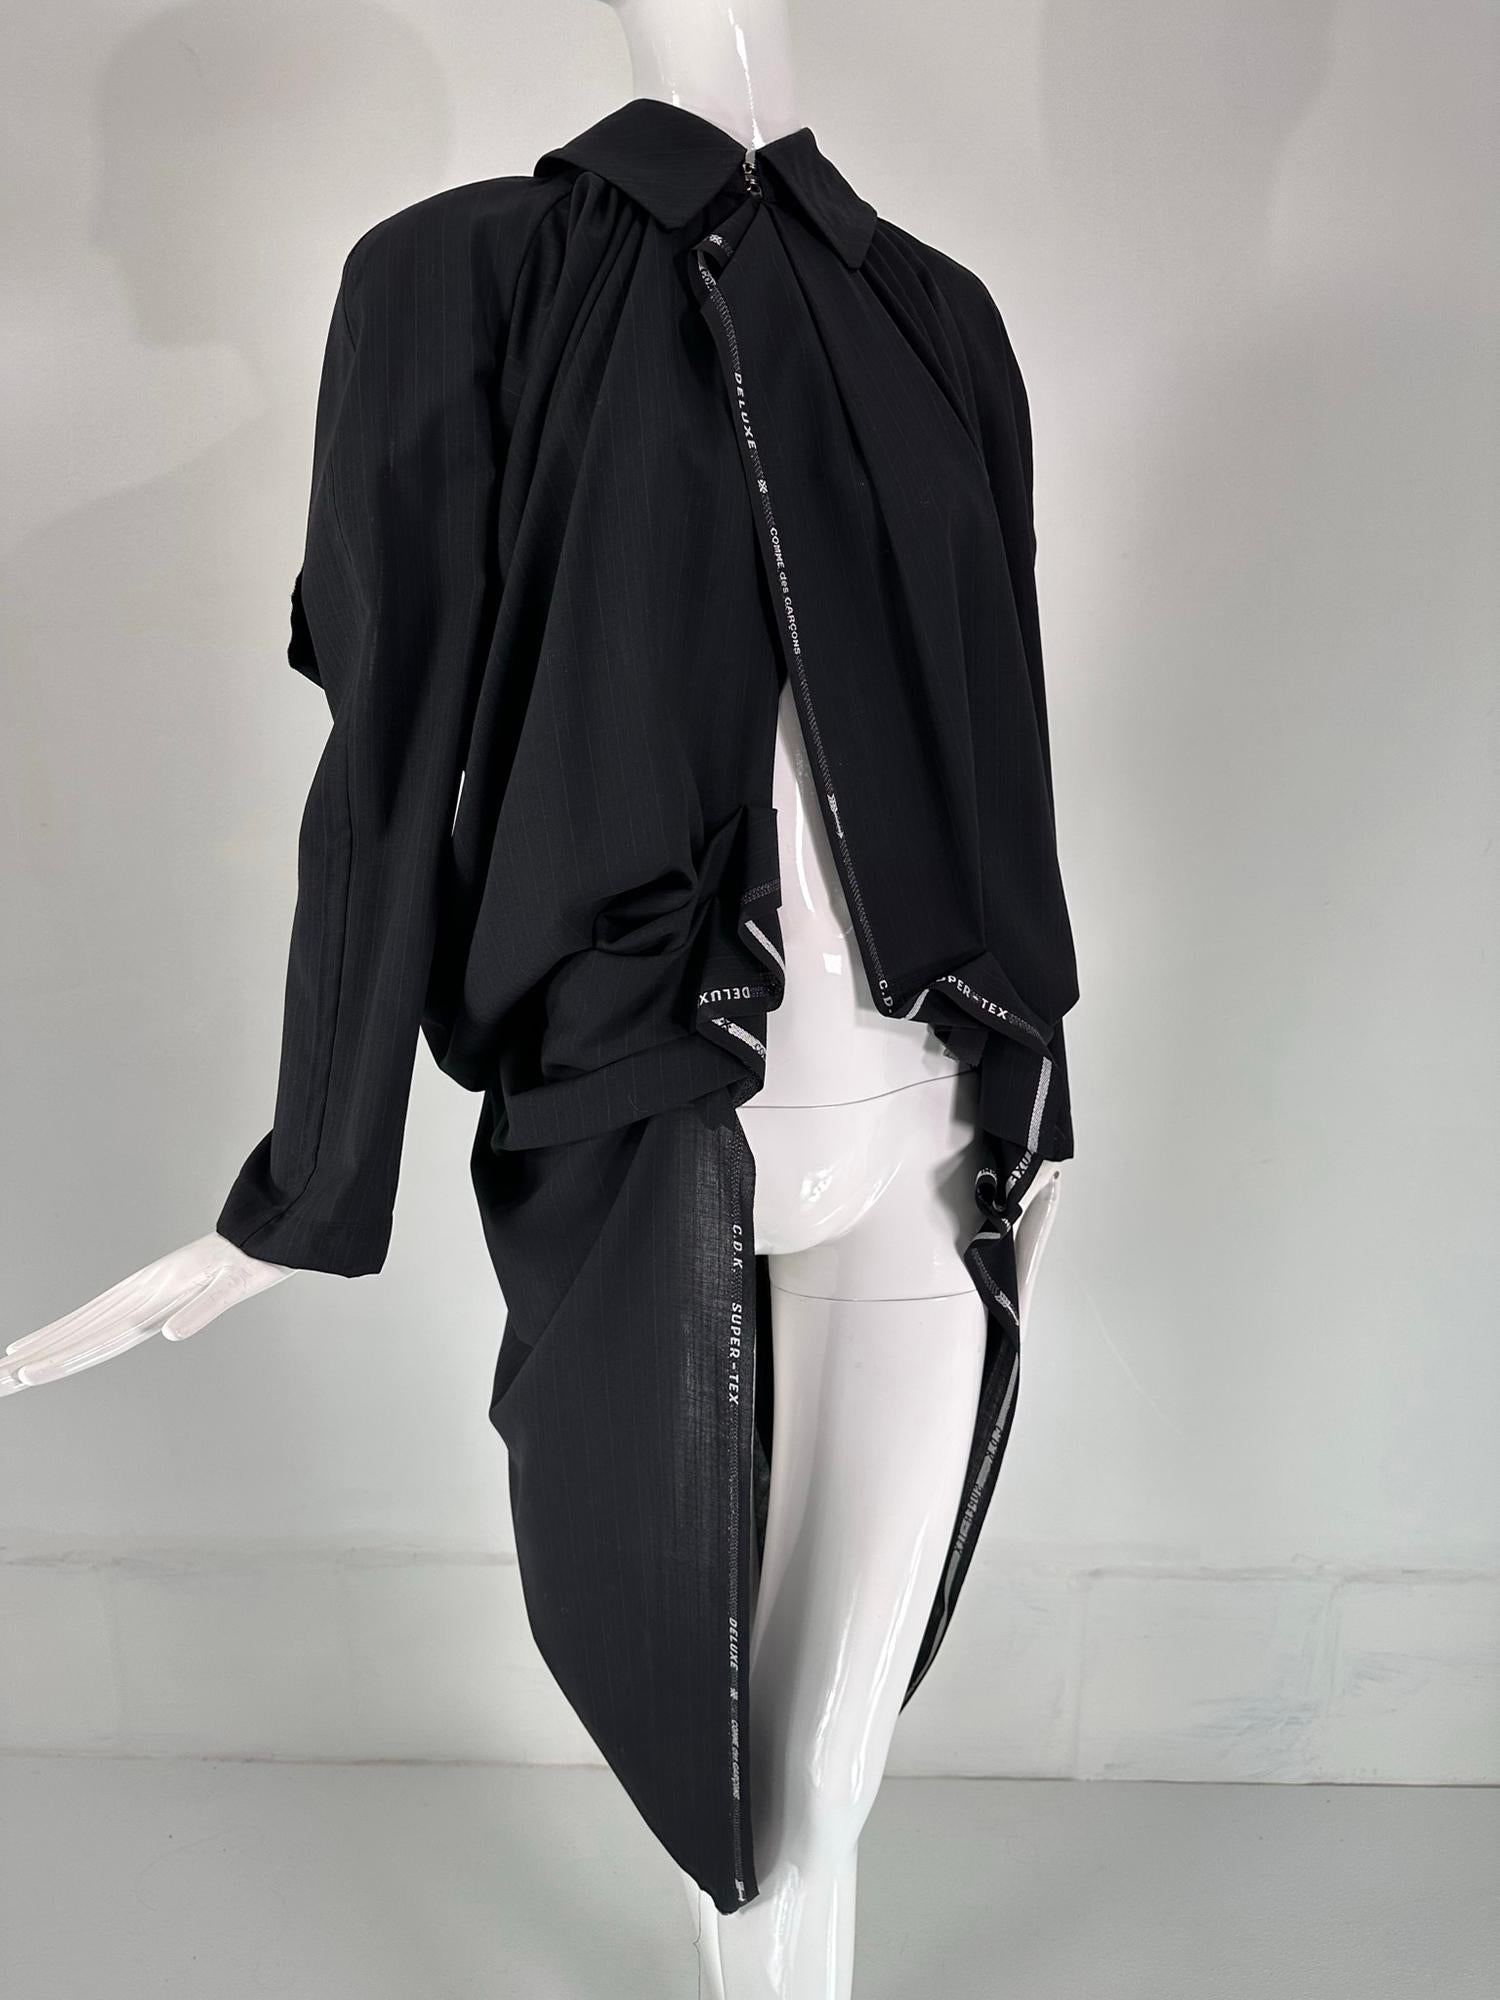 Comme Des Garçons deconstructed black wool blend pin stripe cape/coat 2005. Cocoon shape with collar that closes at the neck front with double silver hook & eyes. Long sleeves are attached at the shoulder front edges but are open at the back.  Woven